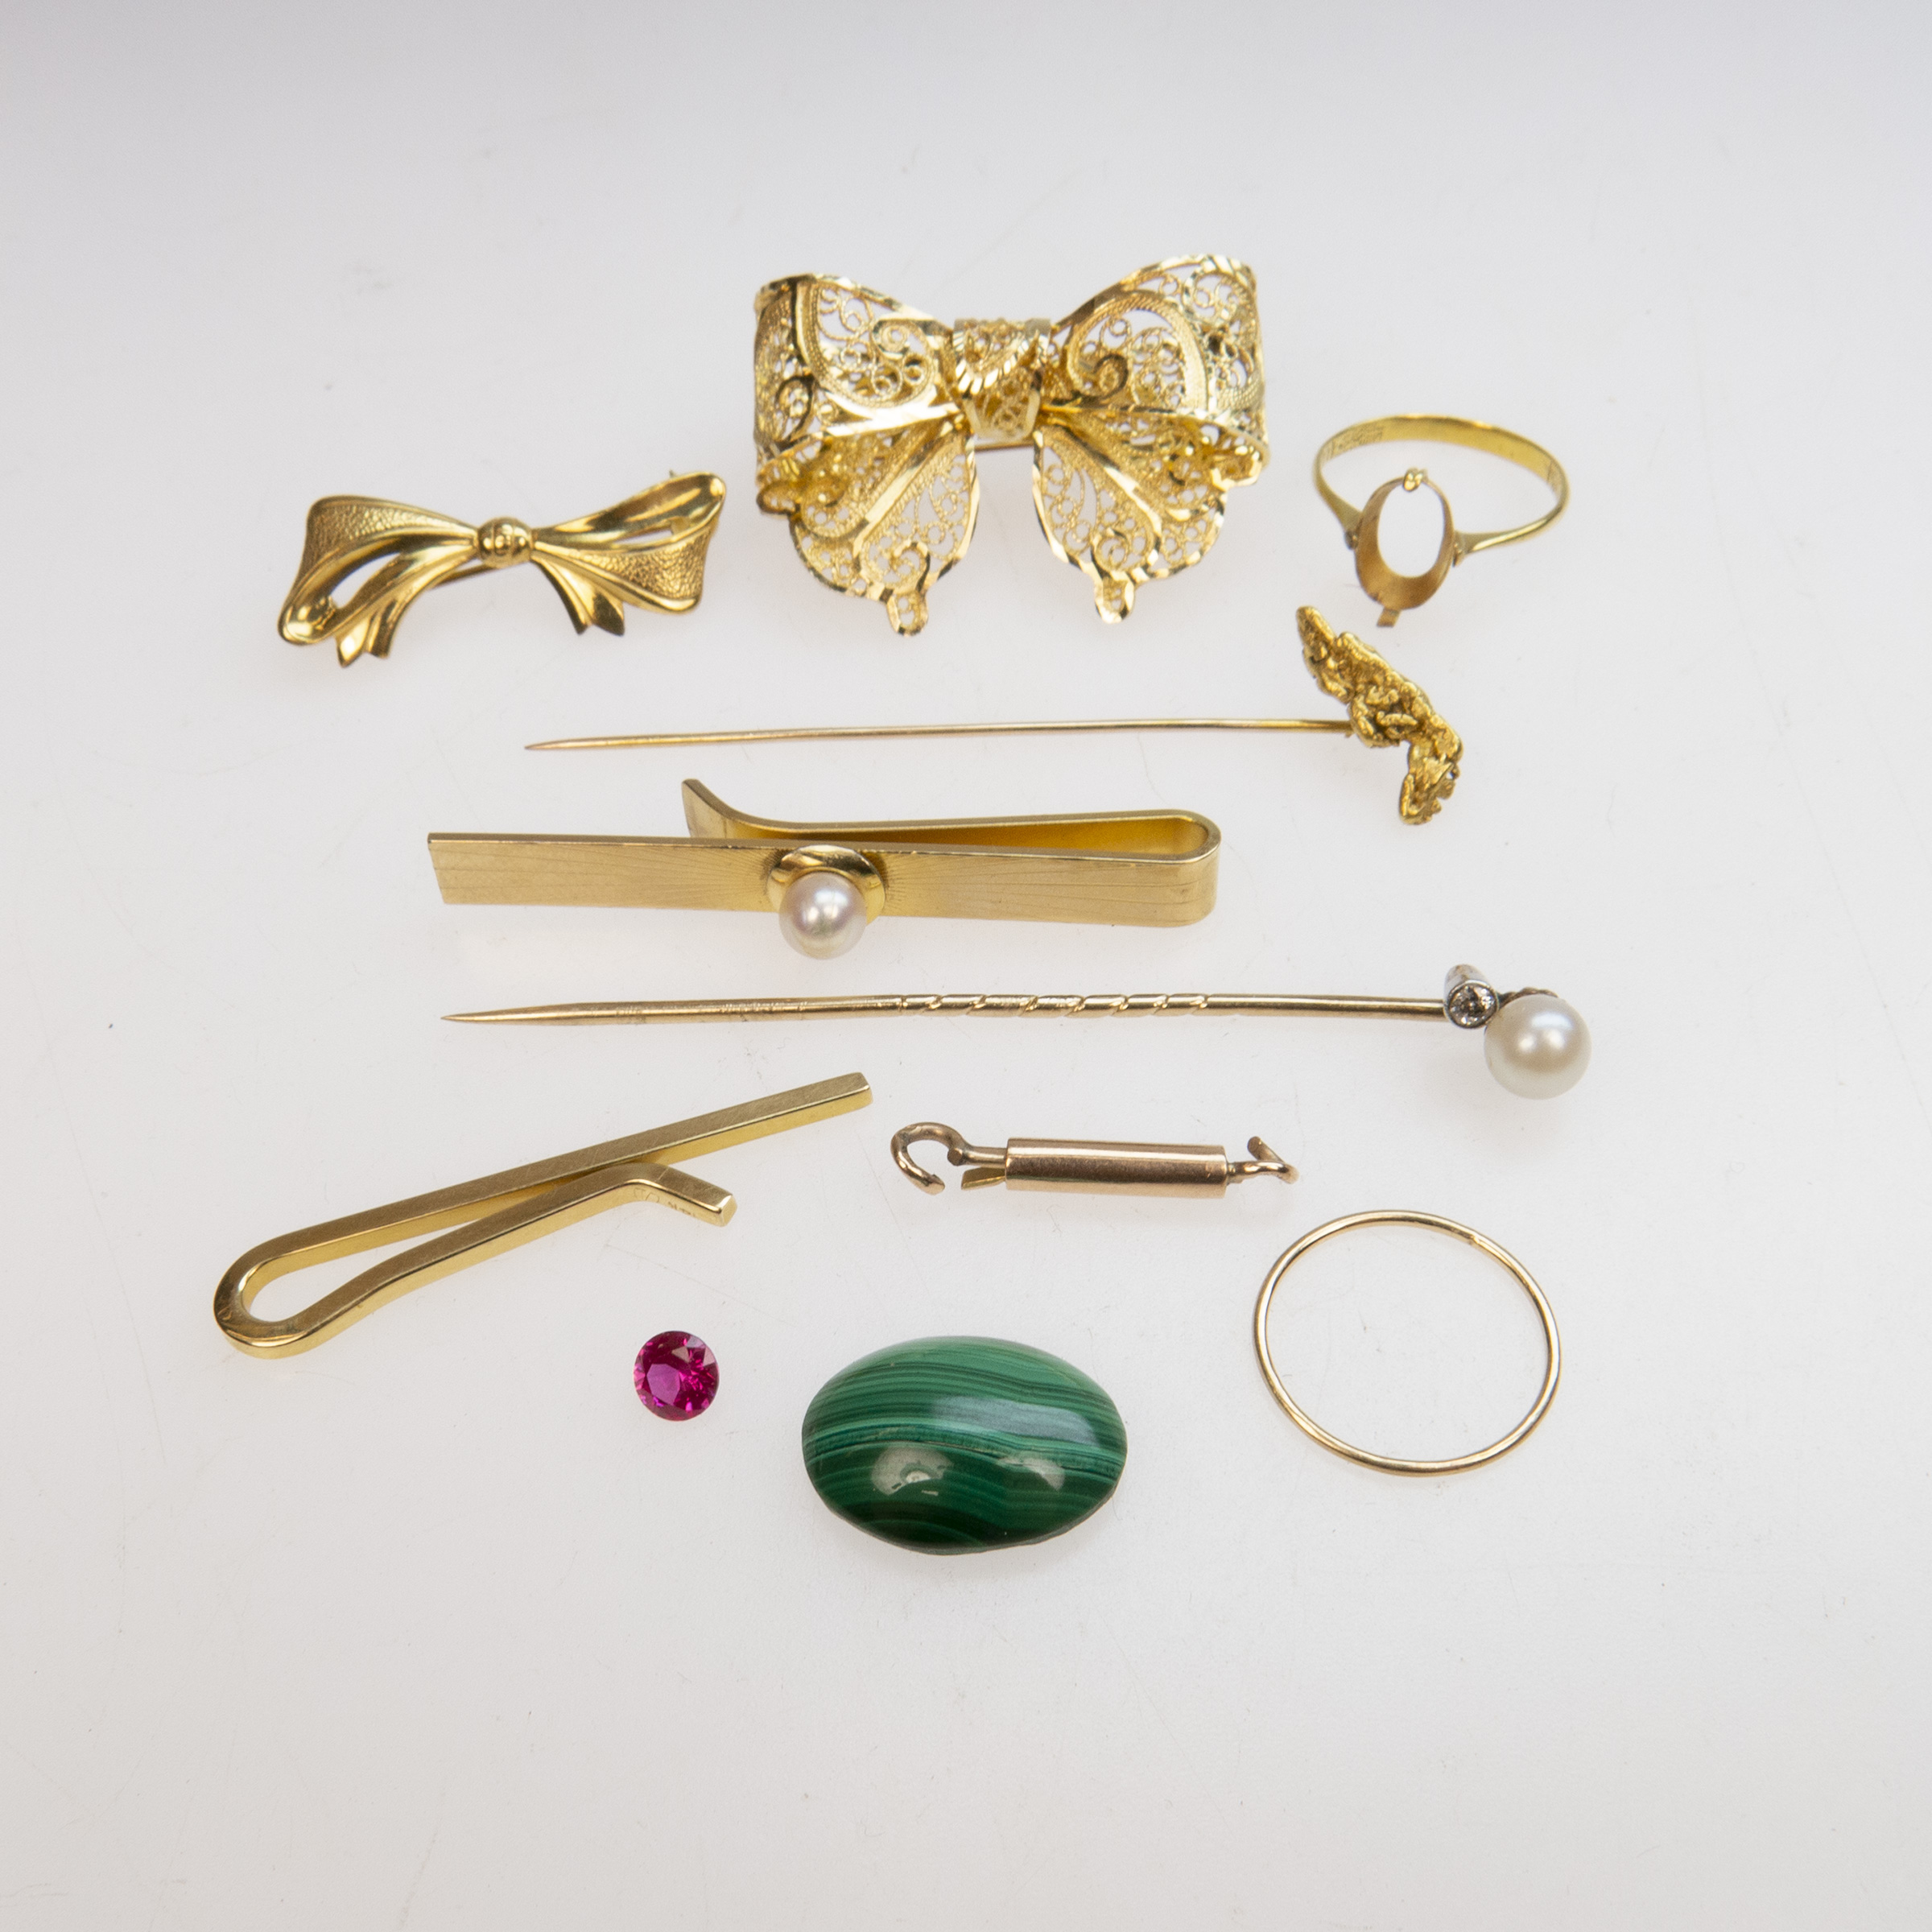 Small Quantity of Gold and Gold-Filled Jewellery